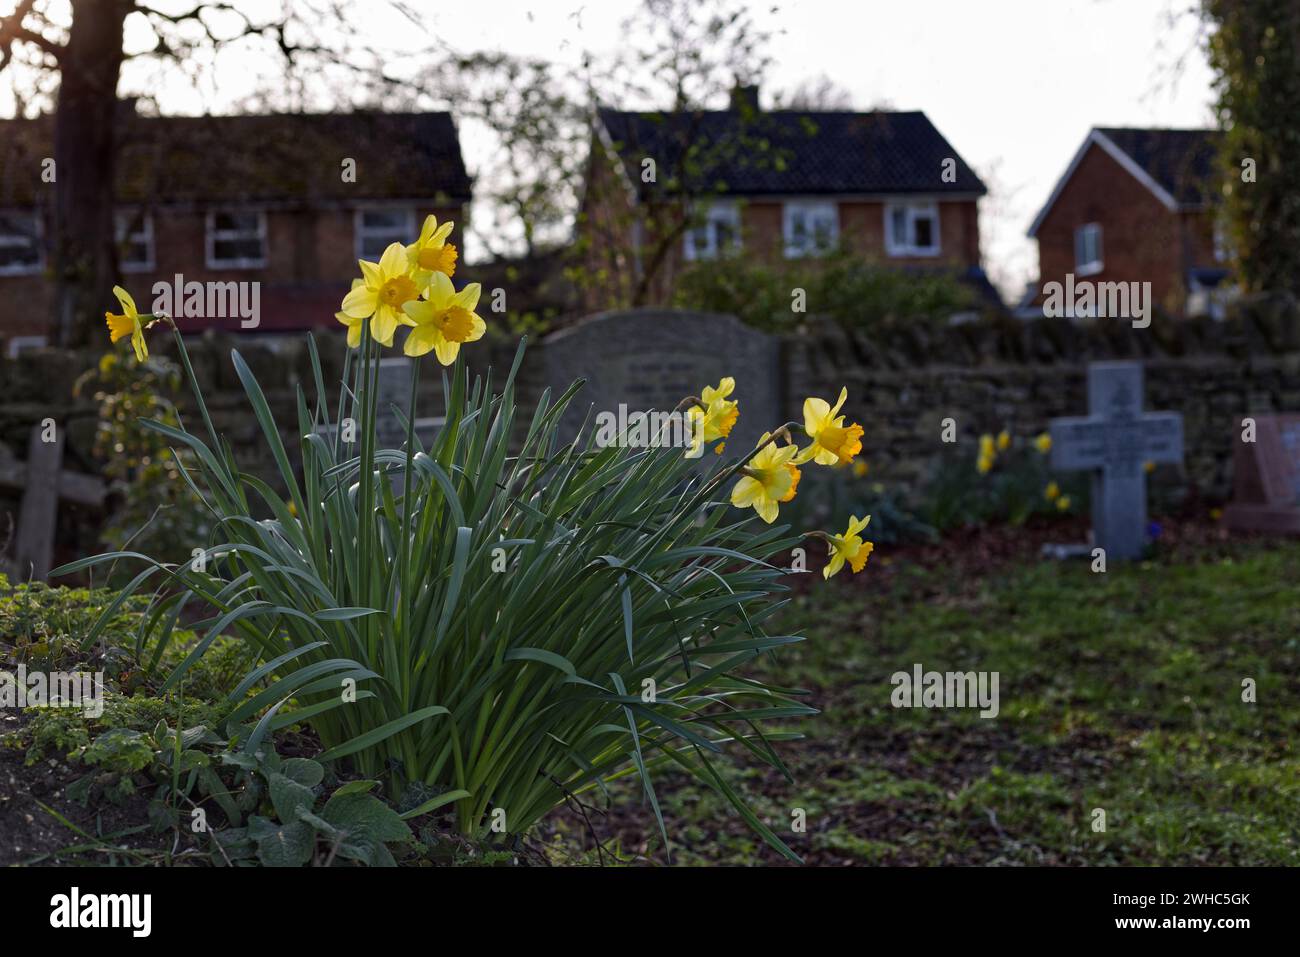 Sharnbrook, Bedfordshire, England, UK, springtime - Daffodils in bloom among headstones in a village churchyard with housing estate in background Stock Photo